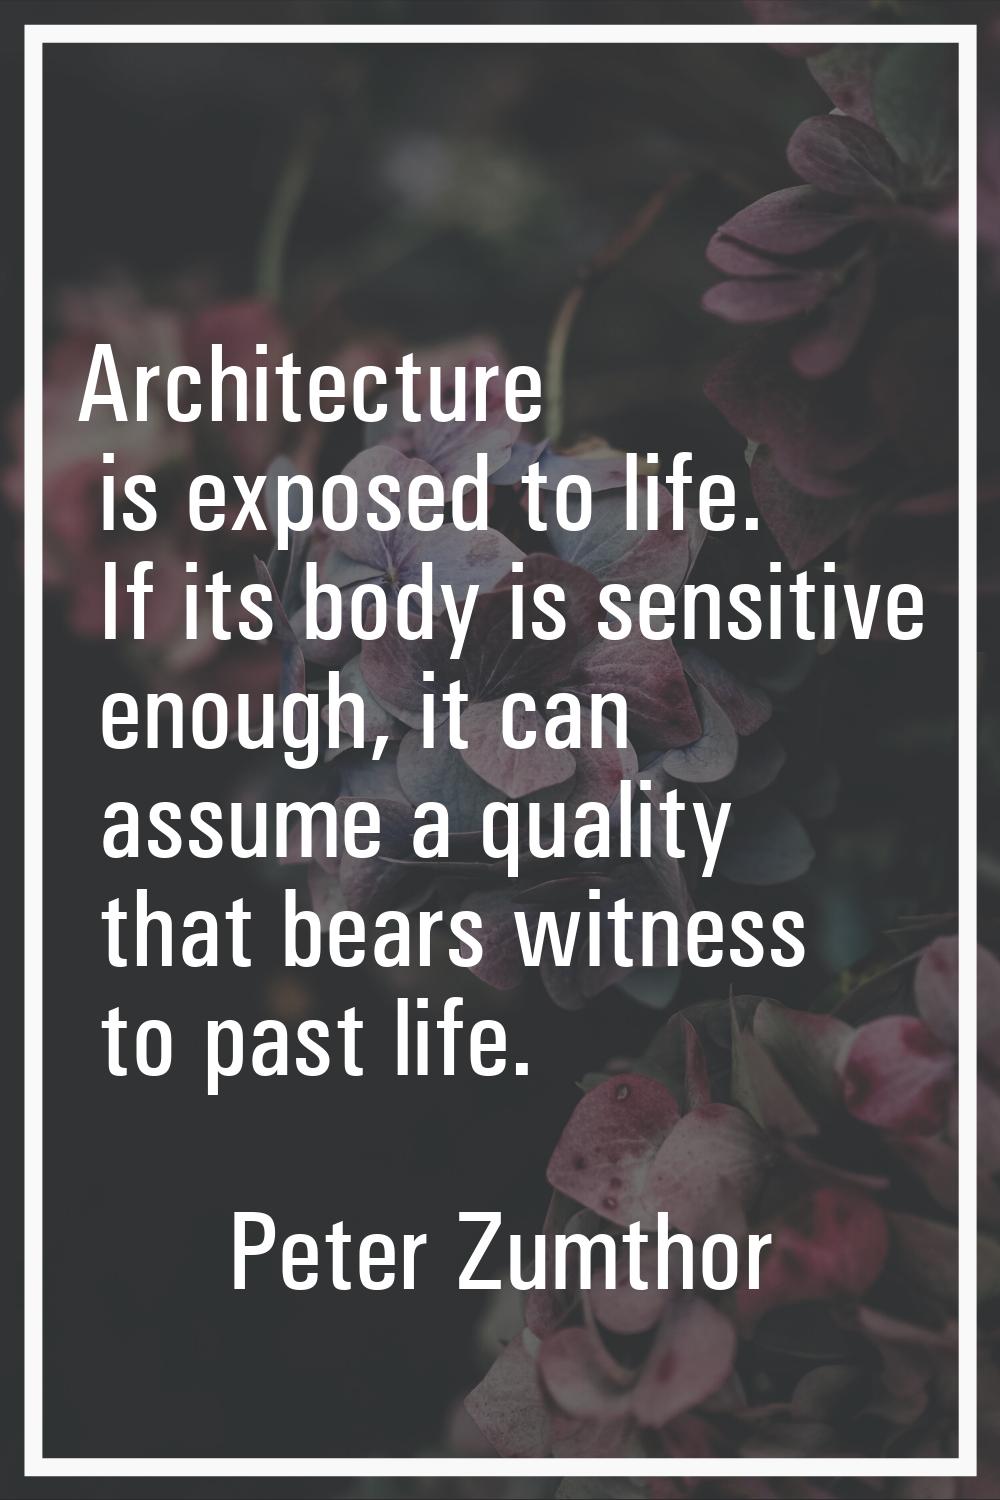 Architecture is exposed to life. If its body is sensitive enough, it can assume a quality that bear